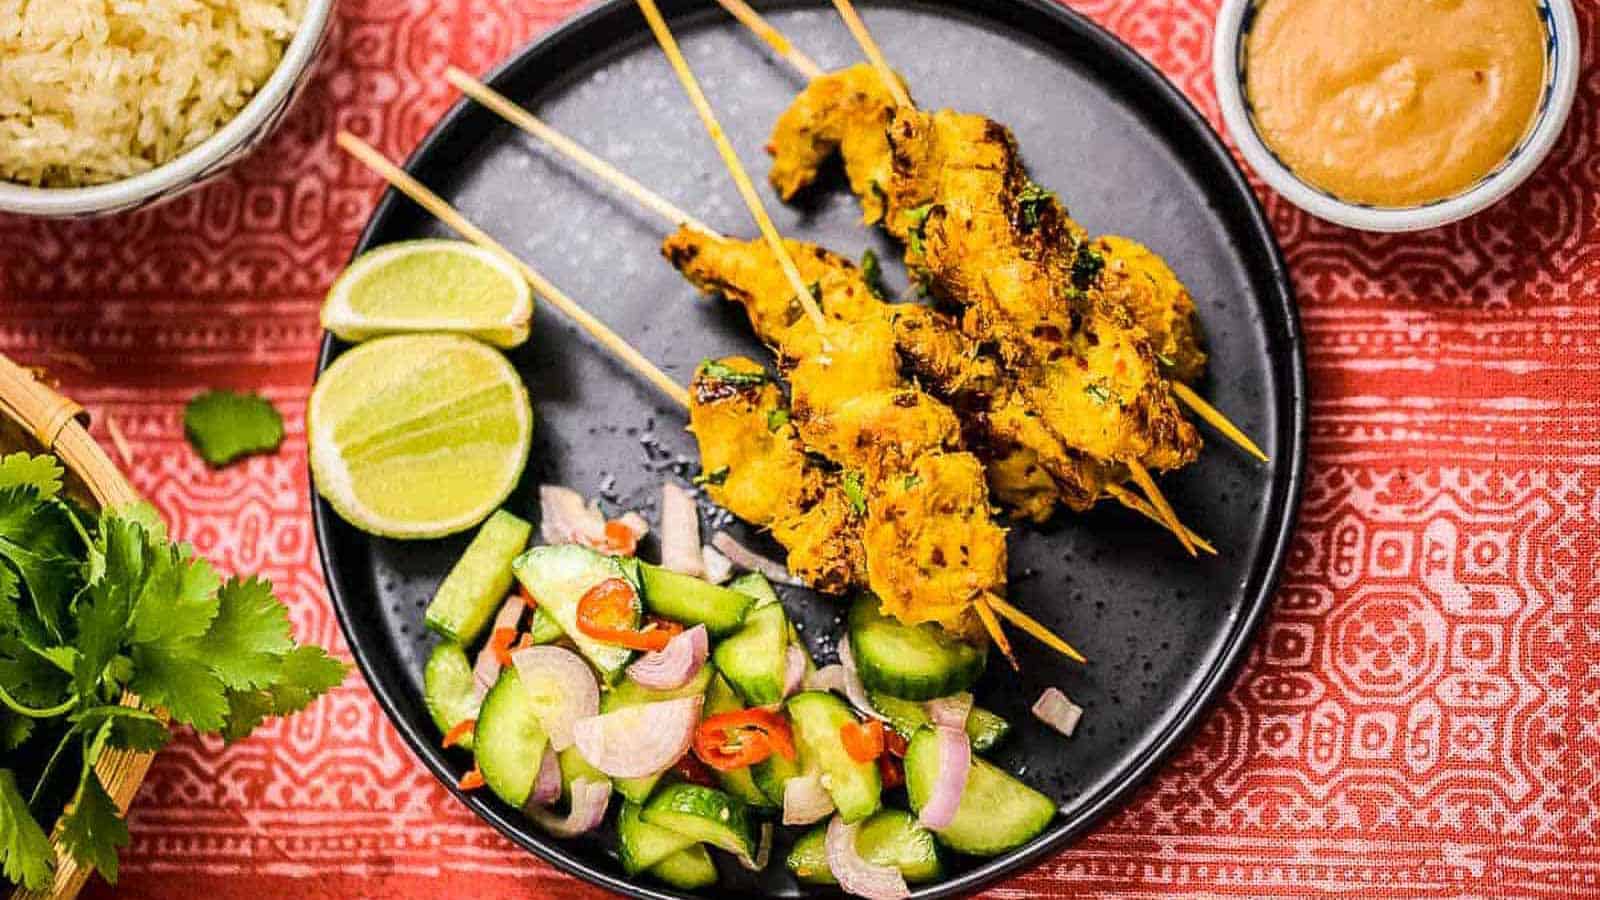 <p>Ever wanted to eat out while staying in? Thai Chicken Satay is the answer. The succulent grilled chicken dipped in a flavorsome sauce transports you straight to Thailand. A must-try if you’re up for a taste adventure!<br><strong>Get the Recipe: </strong><a href="https://allwaysdelicious.com/easy-thai-chicken-satay/?utm_source=msn&utm_medium=page&utm_campaign=msn">Thai Chicken Satay</a></p>